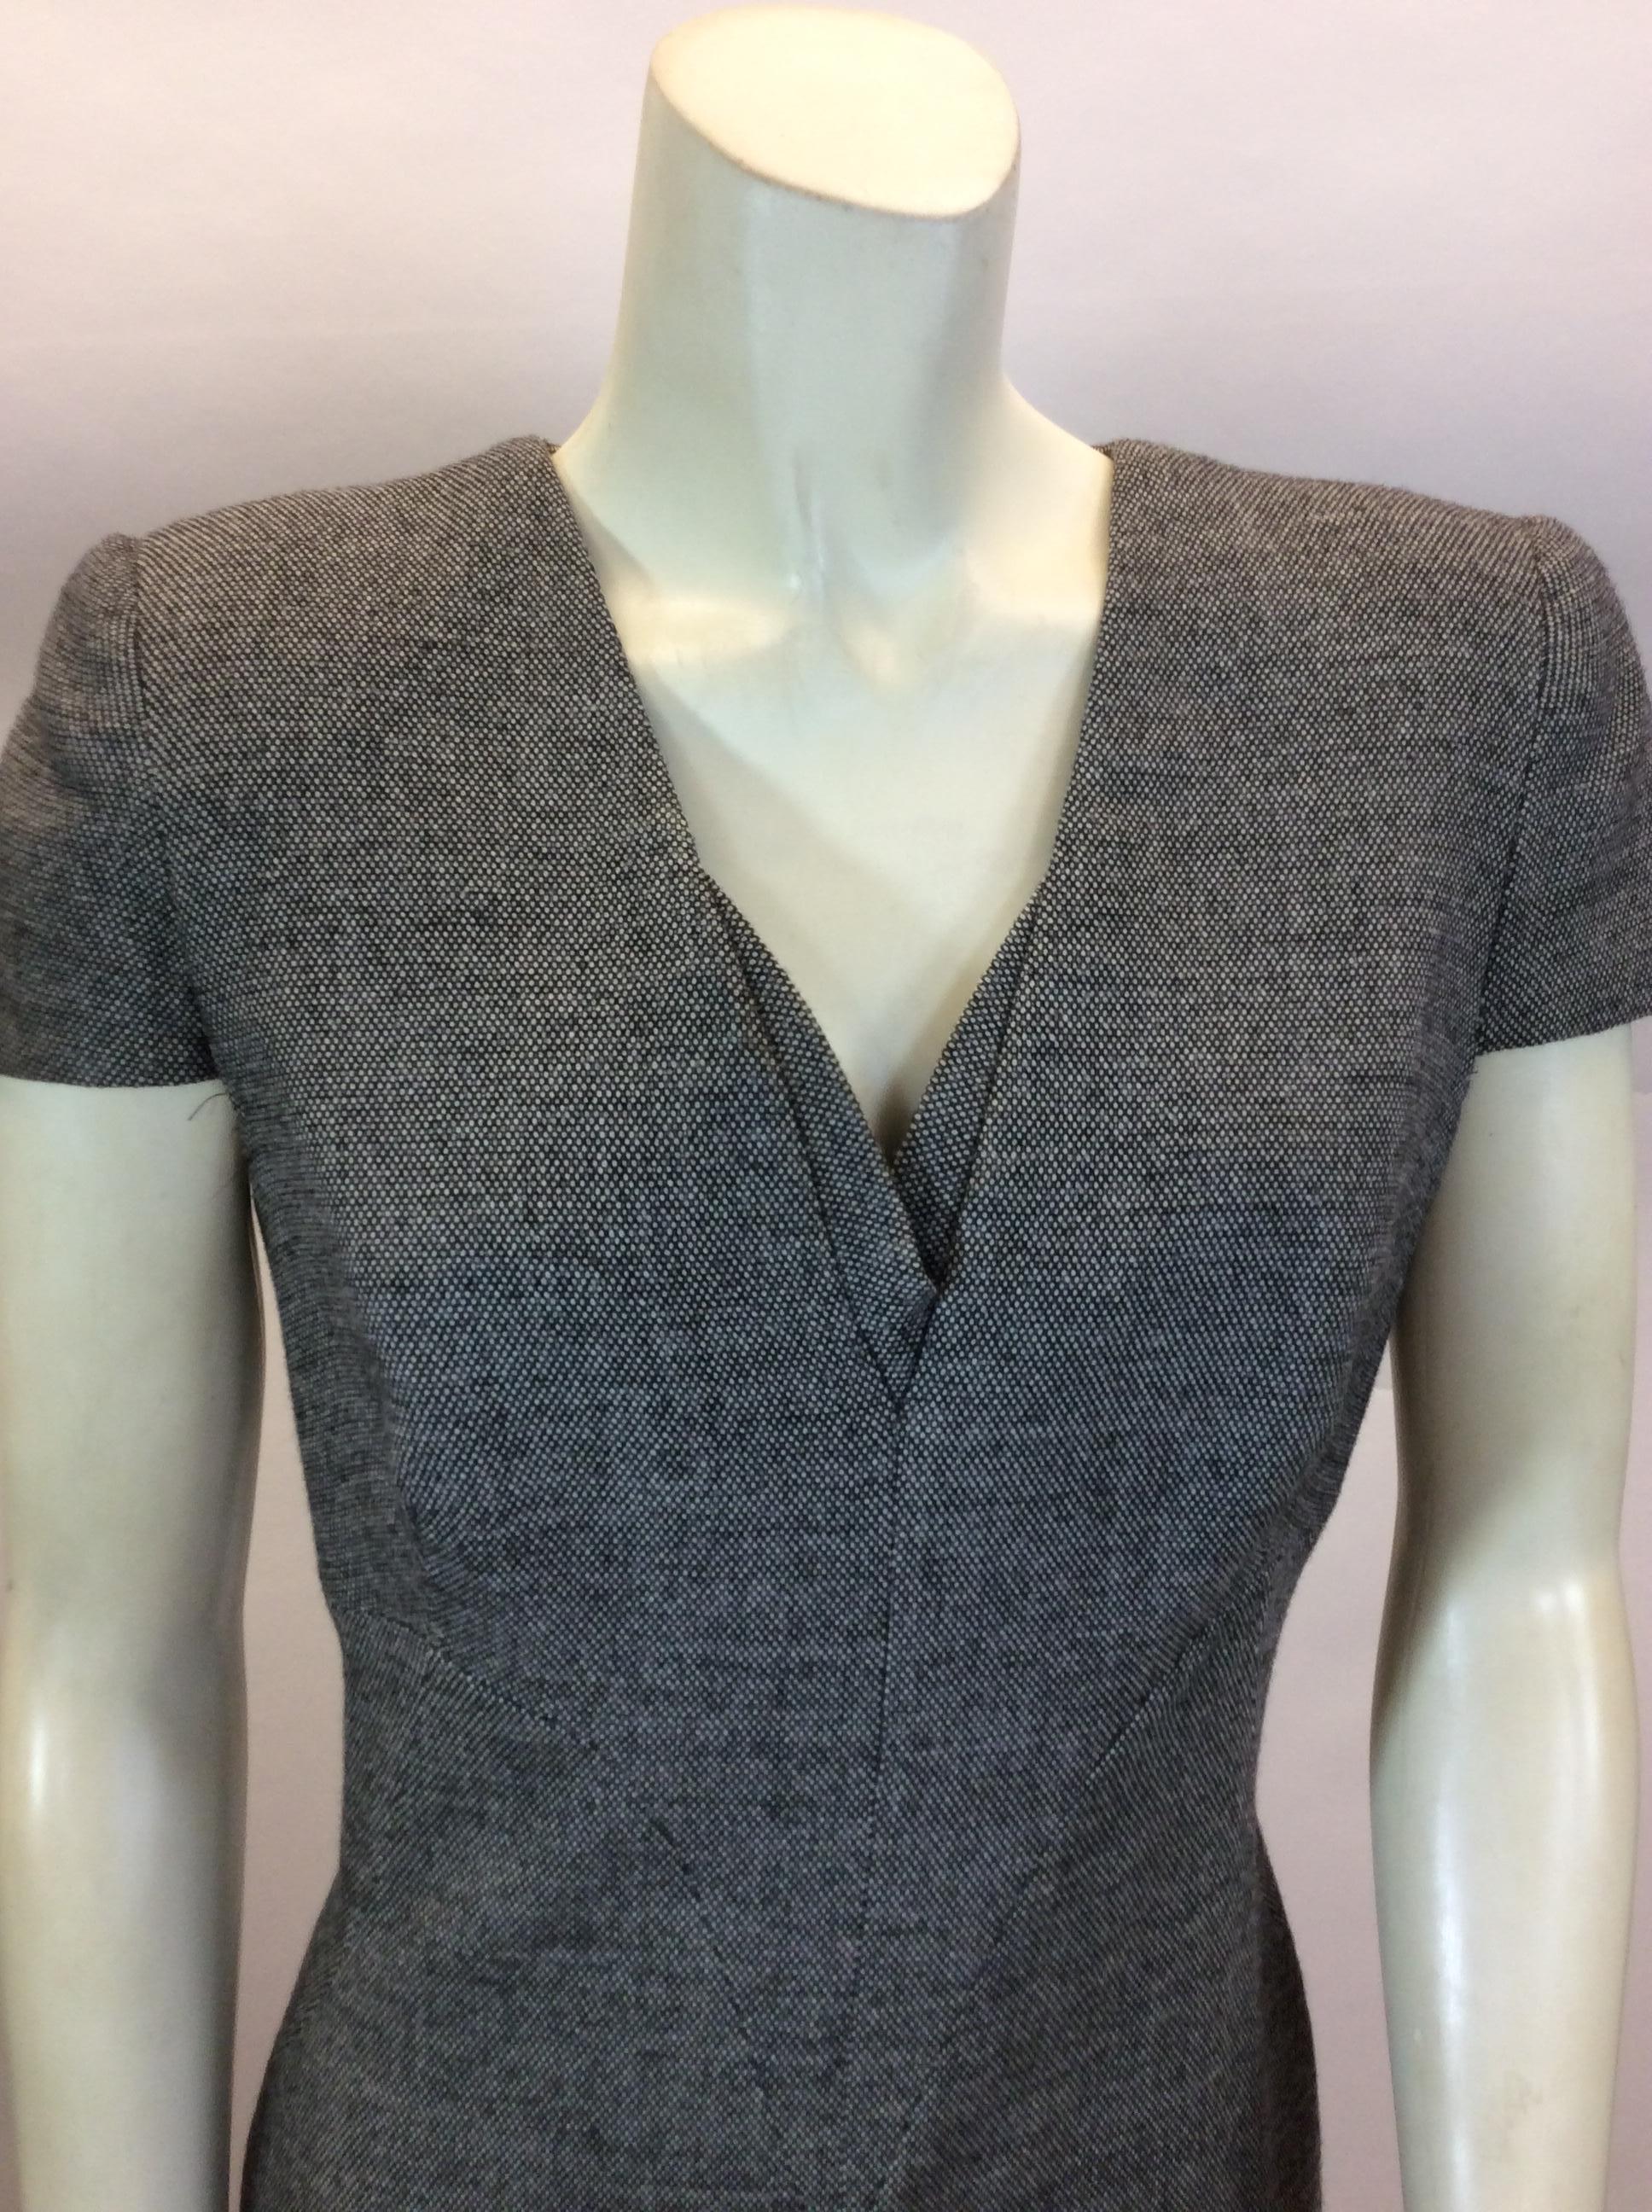 Alexander McQueen Grey Tweed Dress In Good Condition For Sale In Narberth, PA